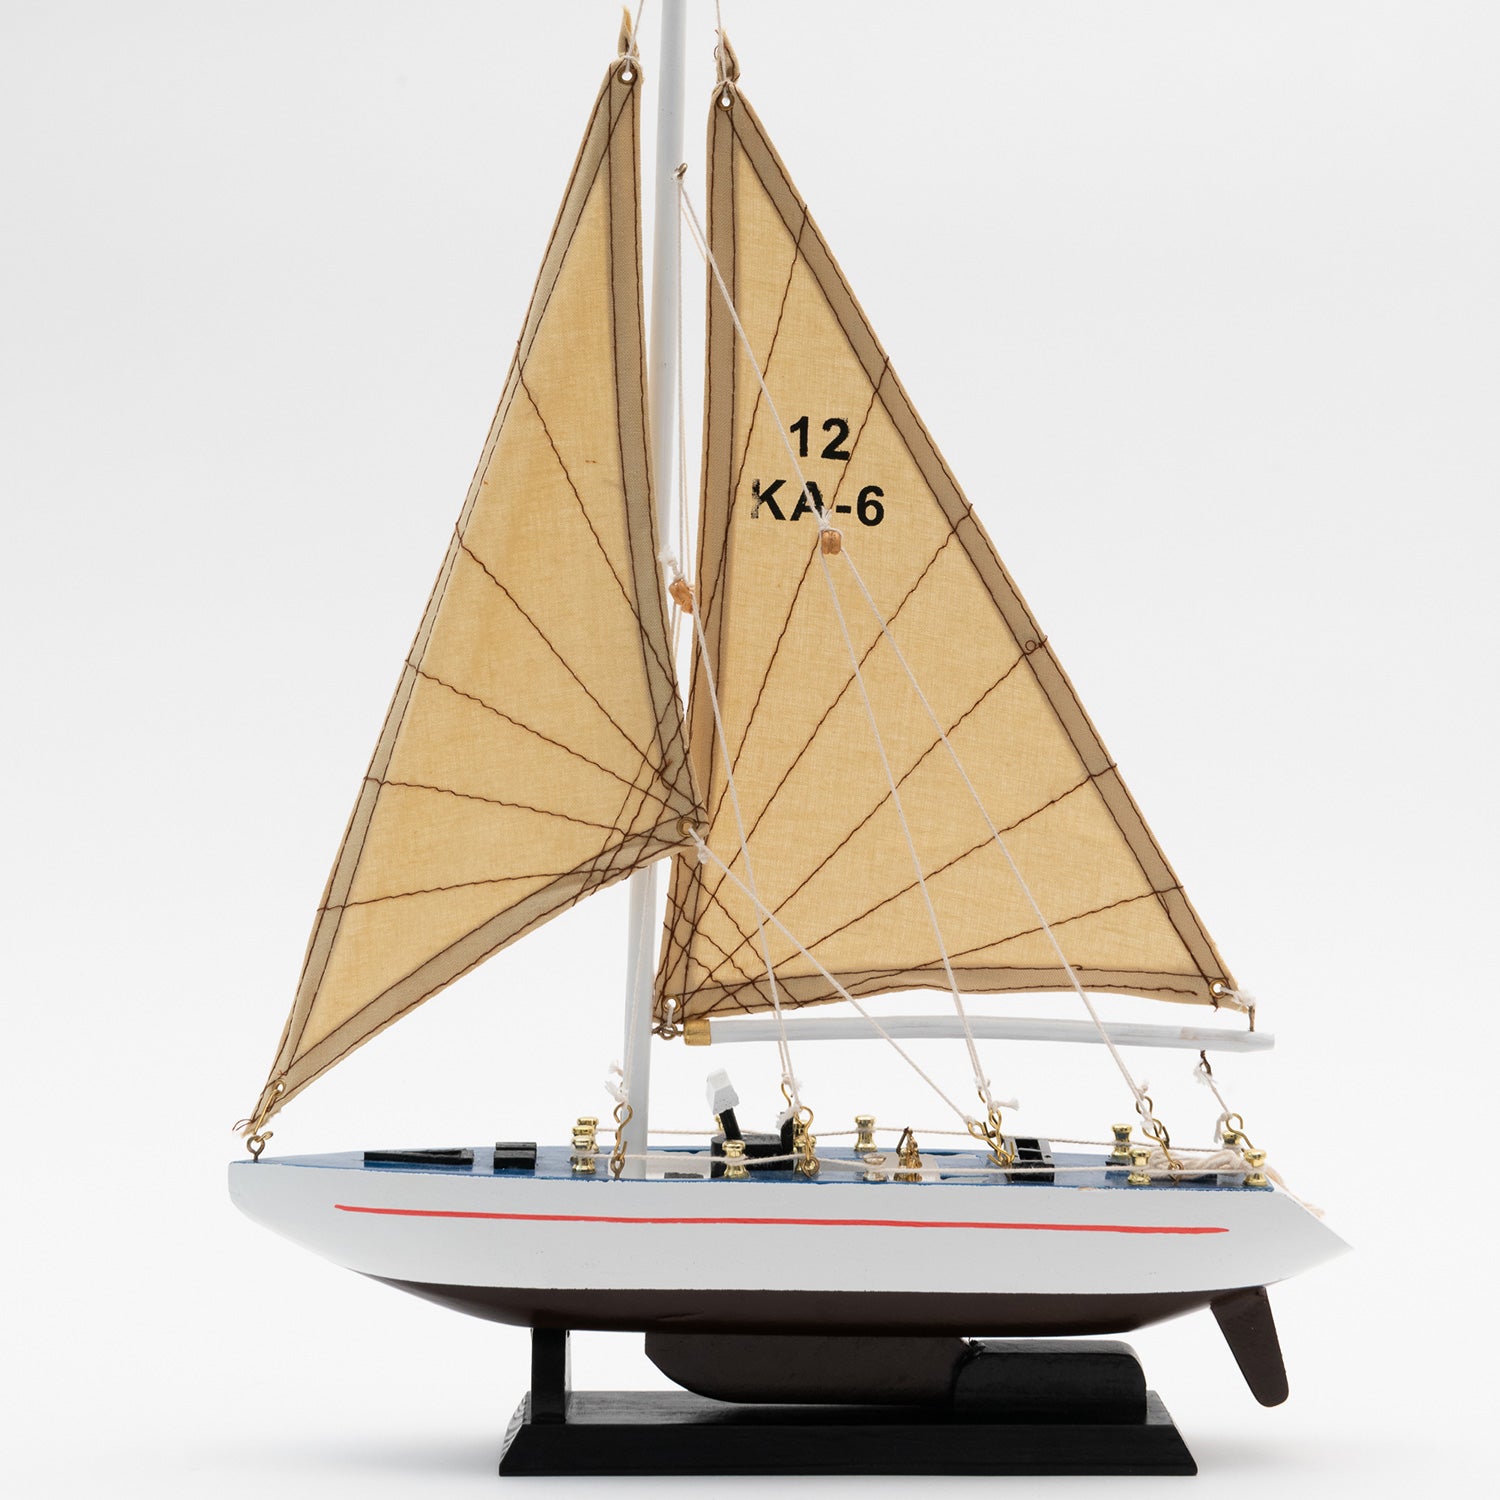 View of the side of the model racing yacht with a black and white hull and a tan sails.